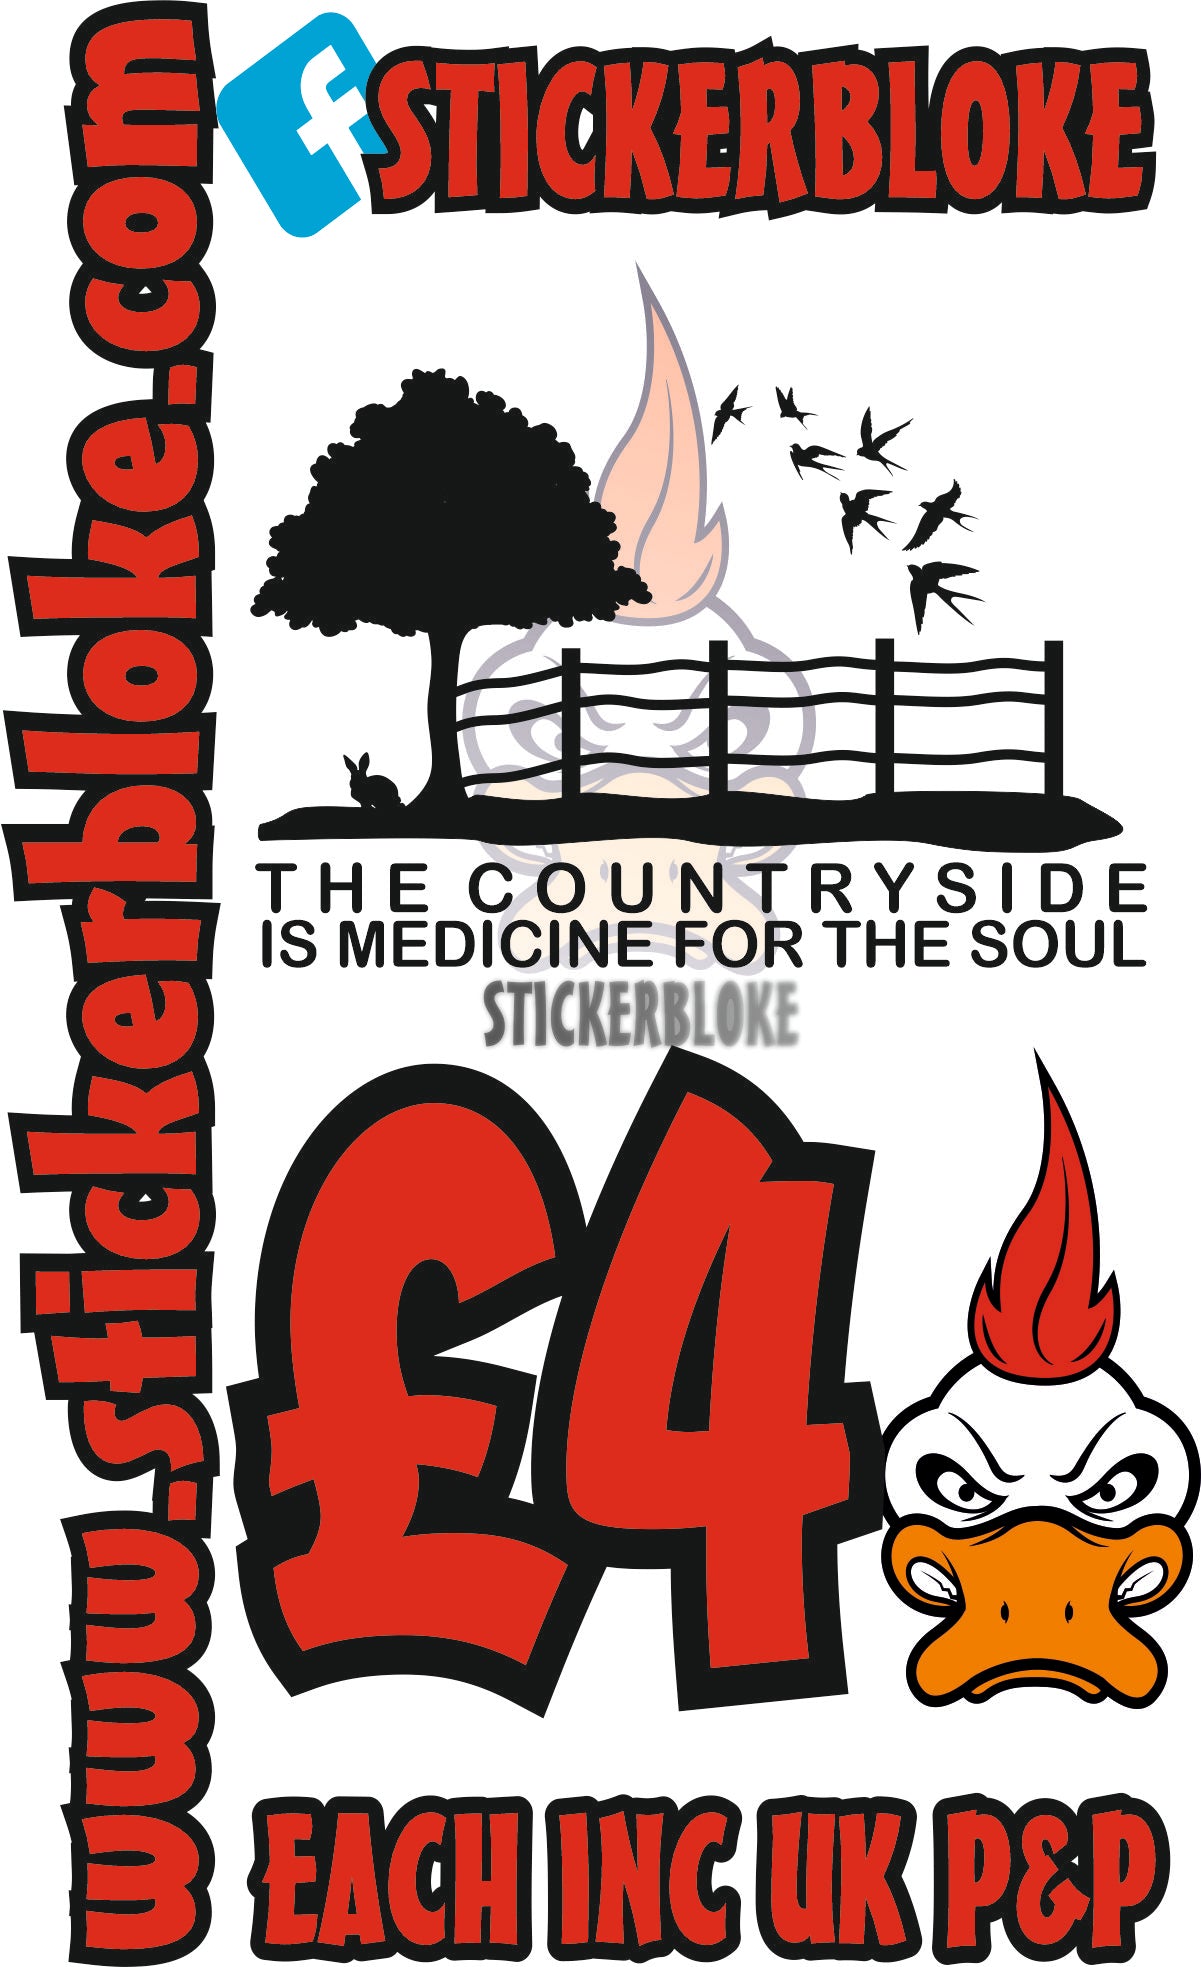 THE COUNTRYSIDE IS MEDICINE FOR THE SOUL - STICKERBLOKE